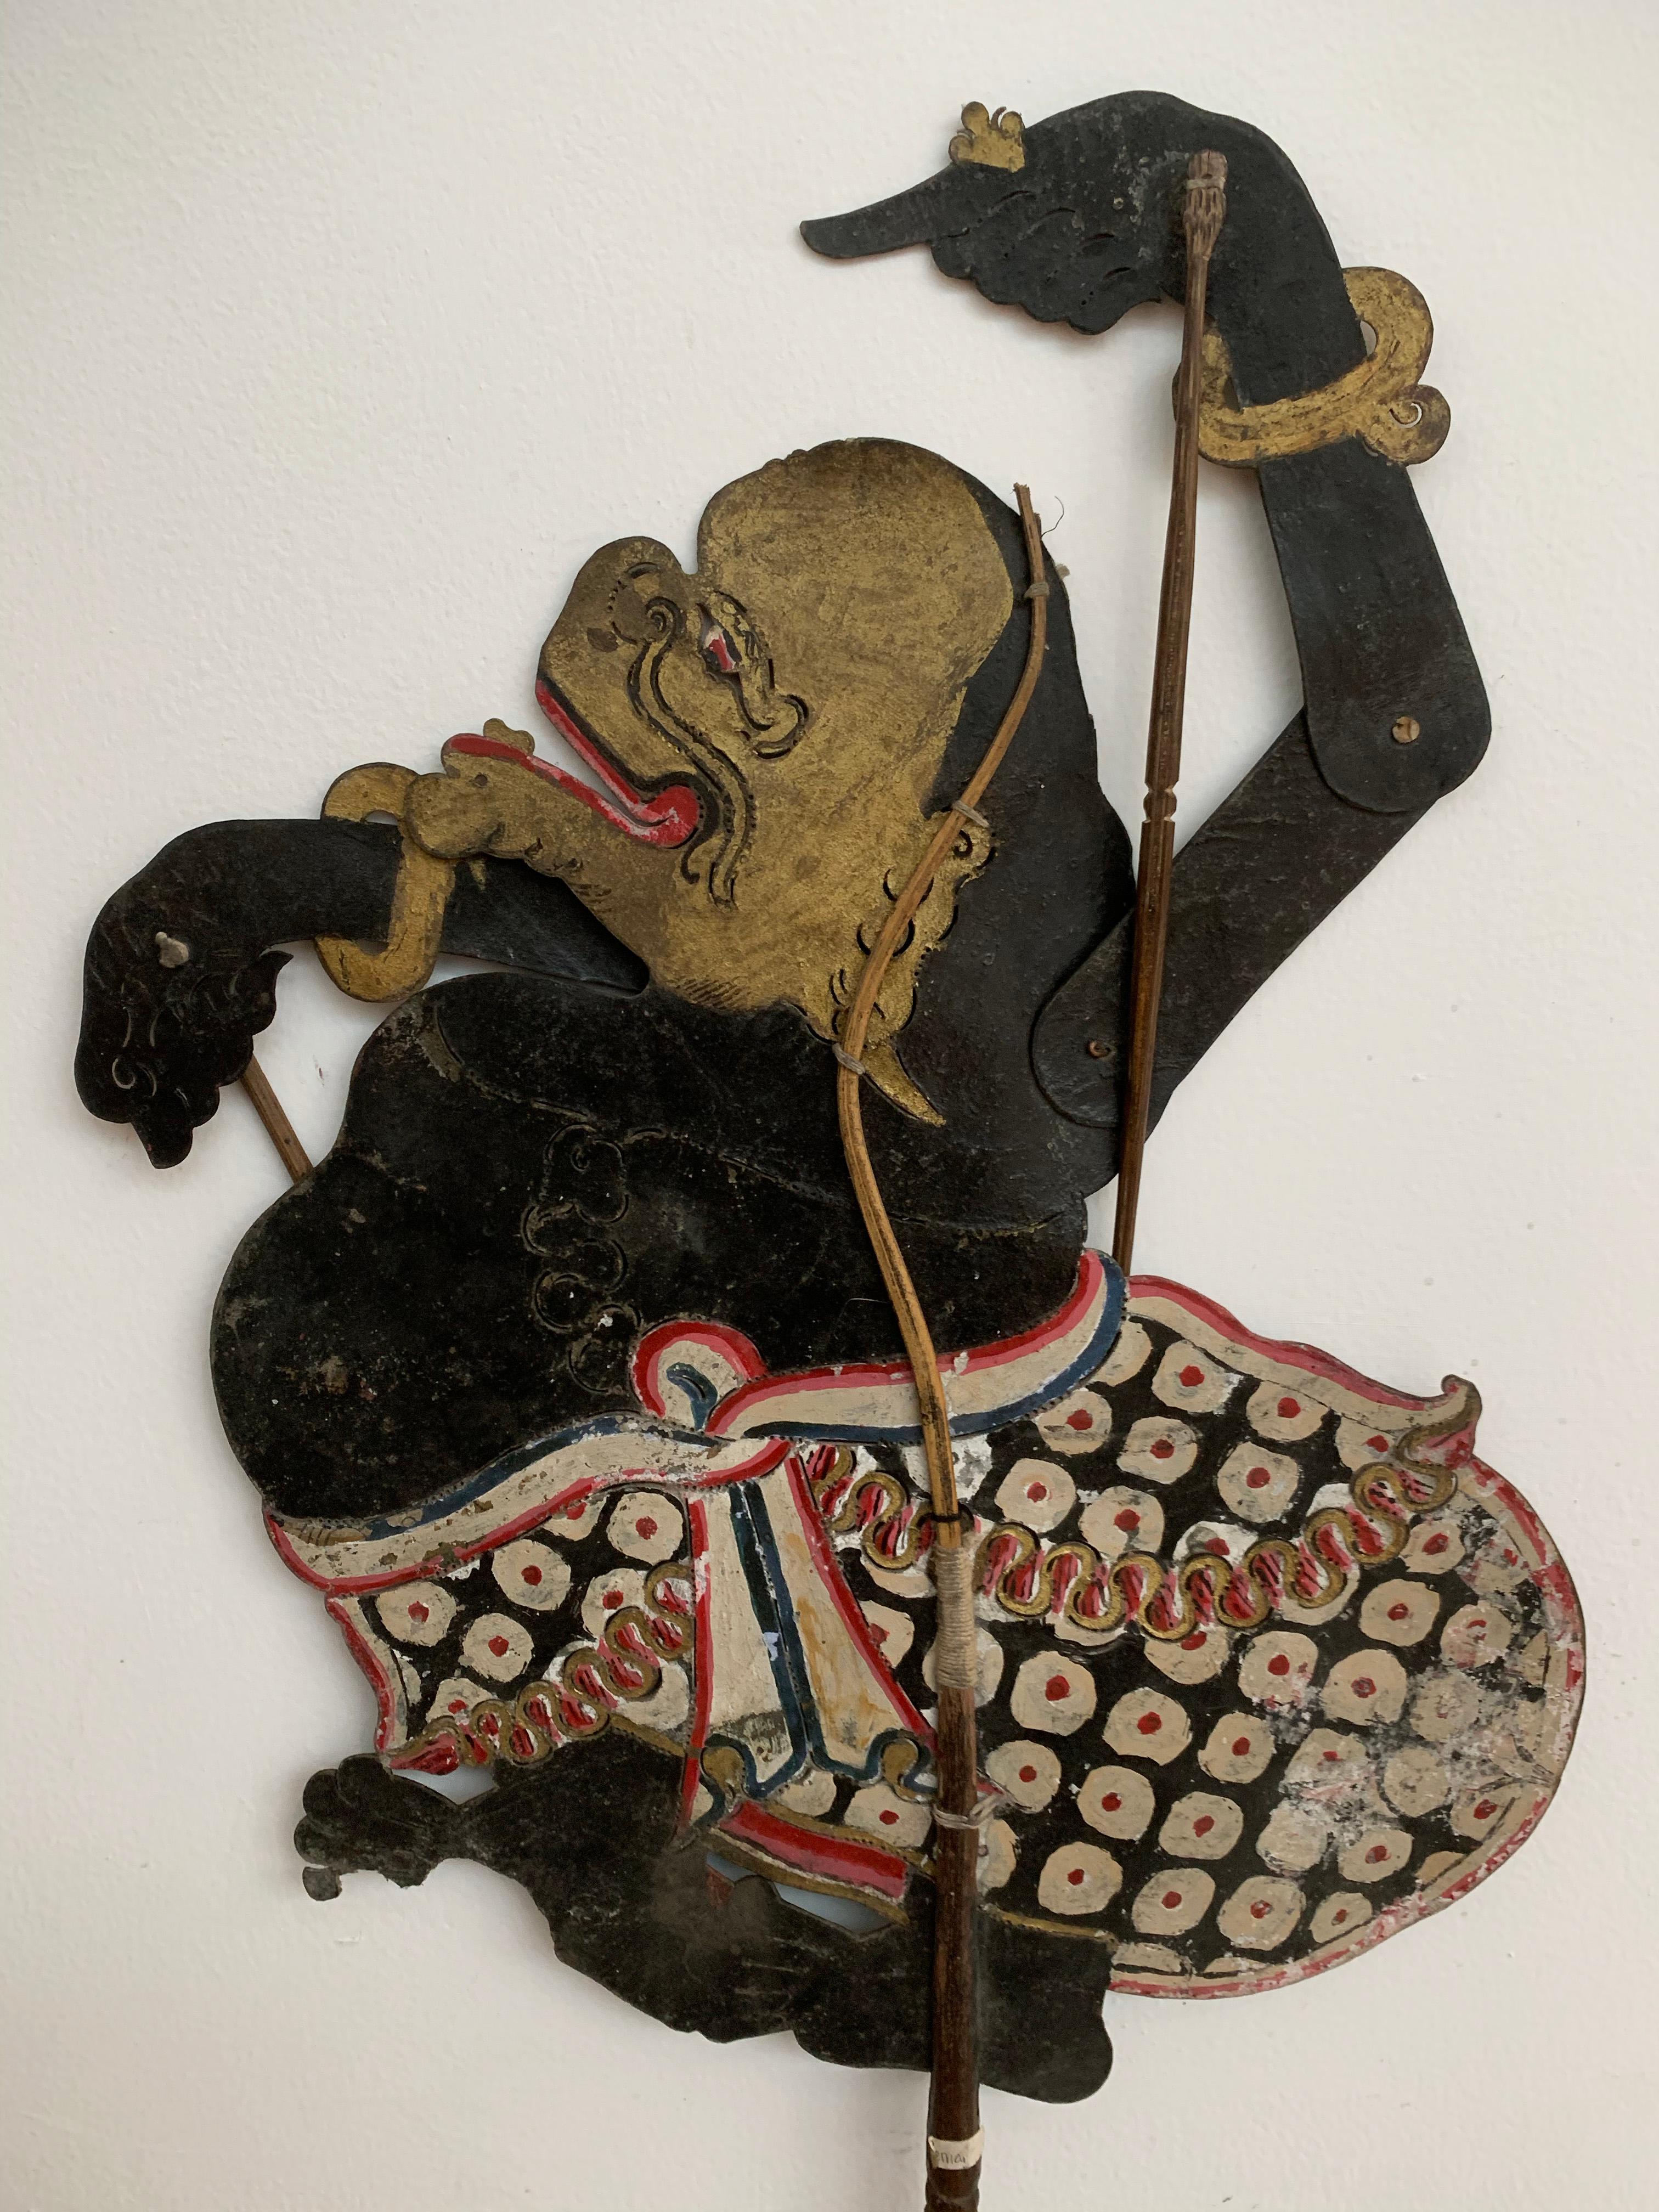 This flat shadow puppet was crafted on the island of Java by a puppet artist using buffalo hide and mounted on bamboo sticks. It features movable arms, controlled by outer bamboo rods. It was used in Wayang puppet shows, a type of shadow puppet show